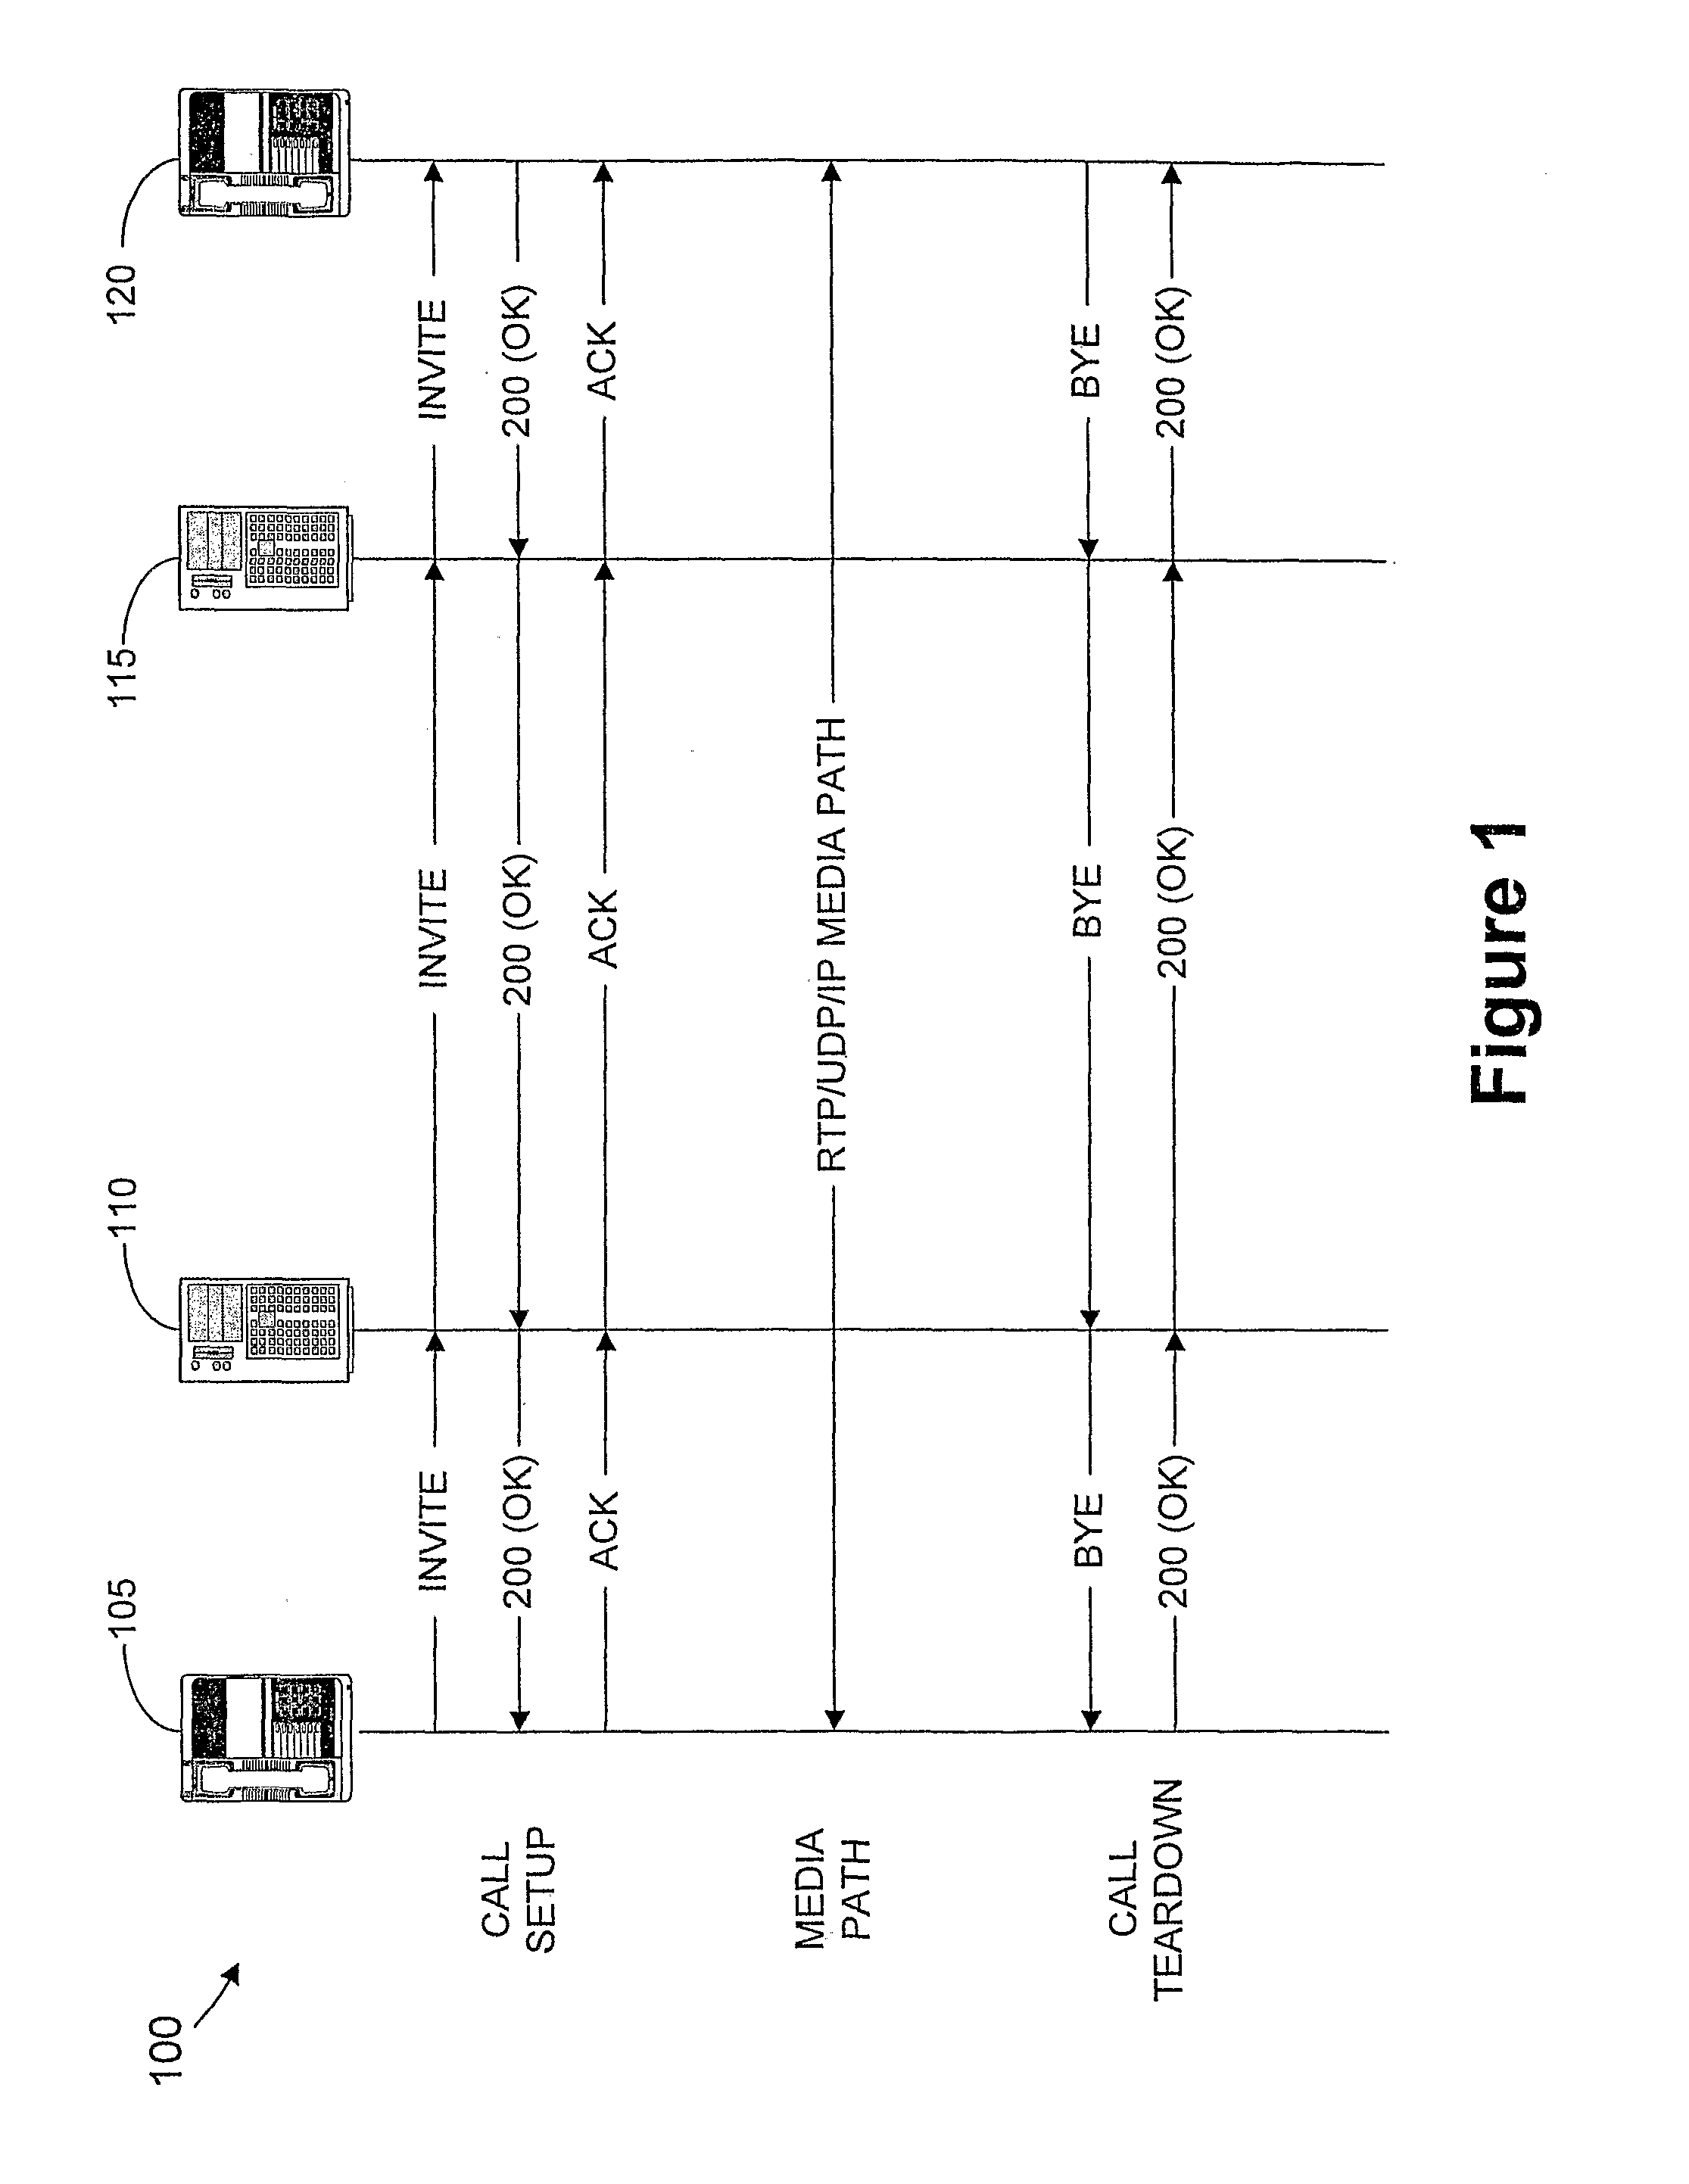 Method and apparatus for providing quality of service to VoIP over 802.11 wireless LANs